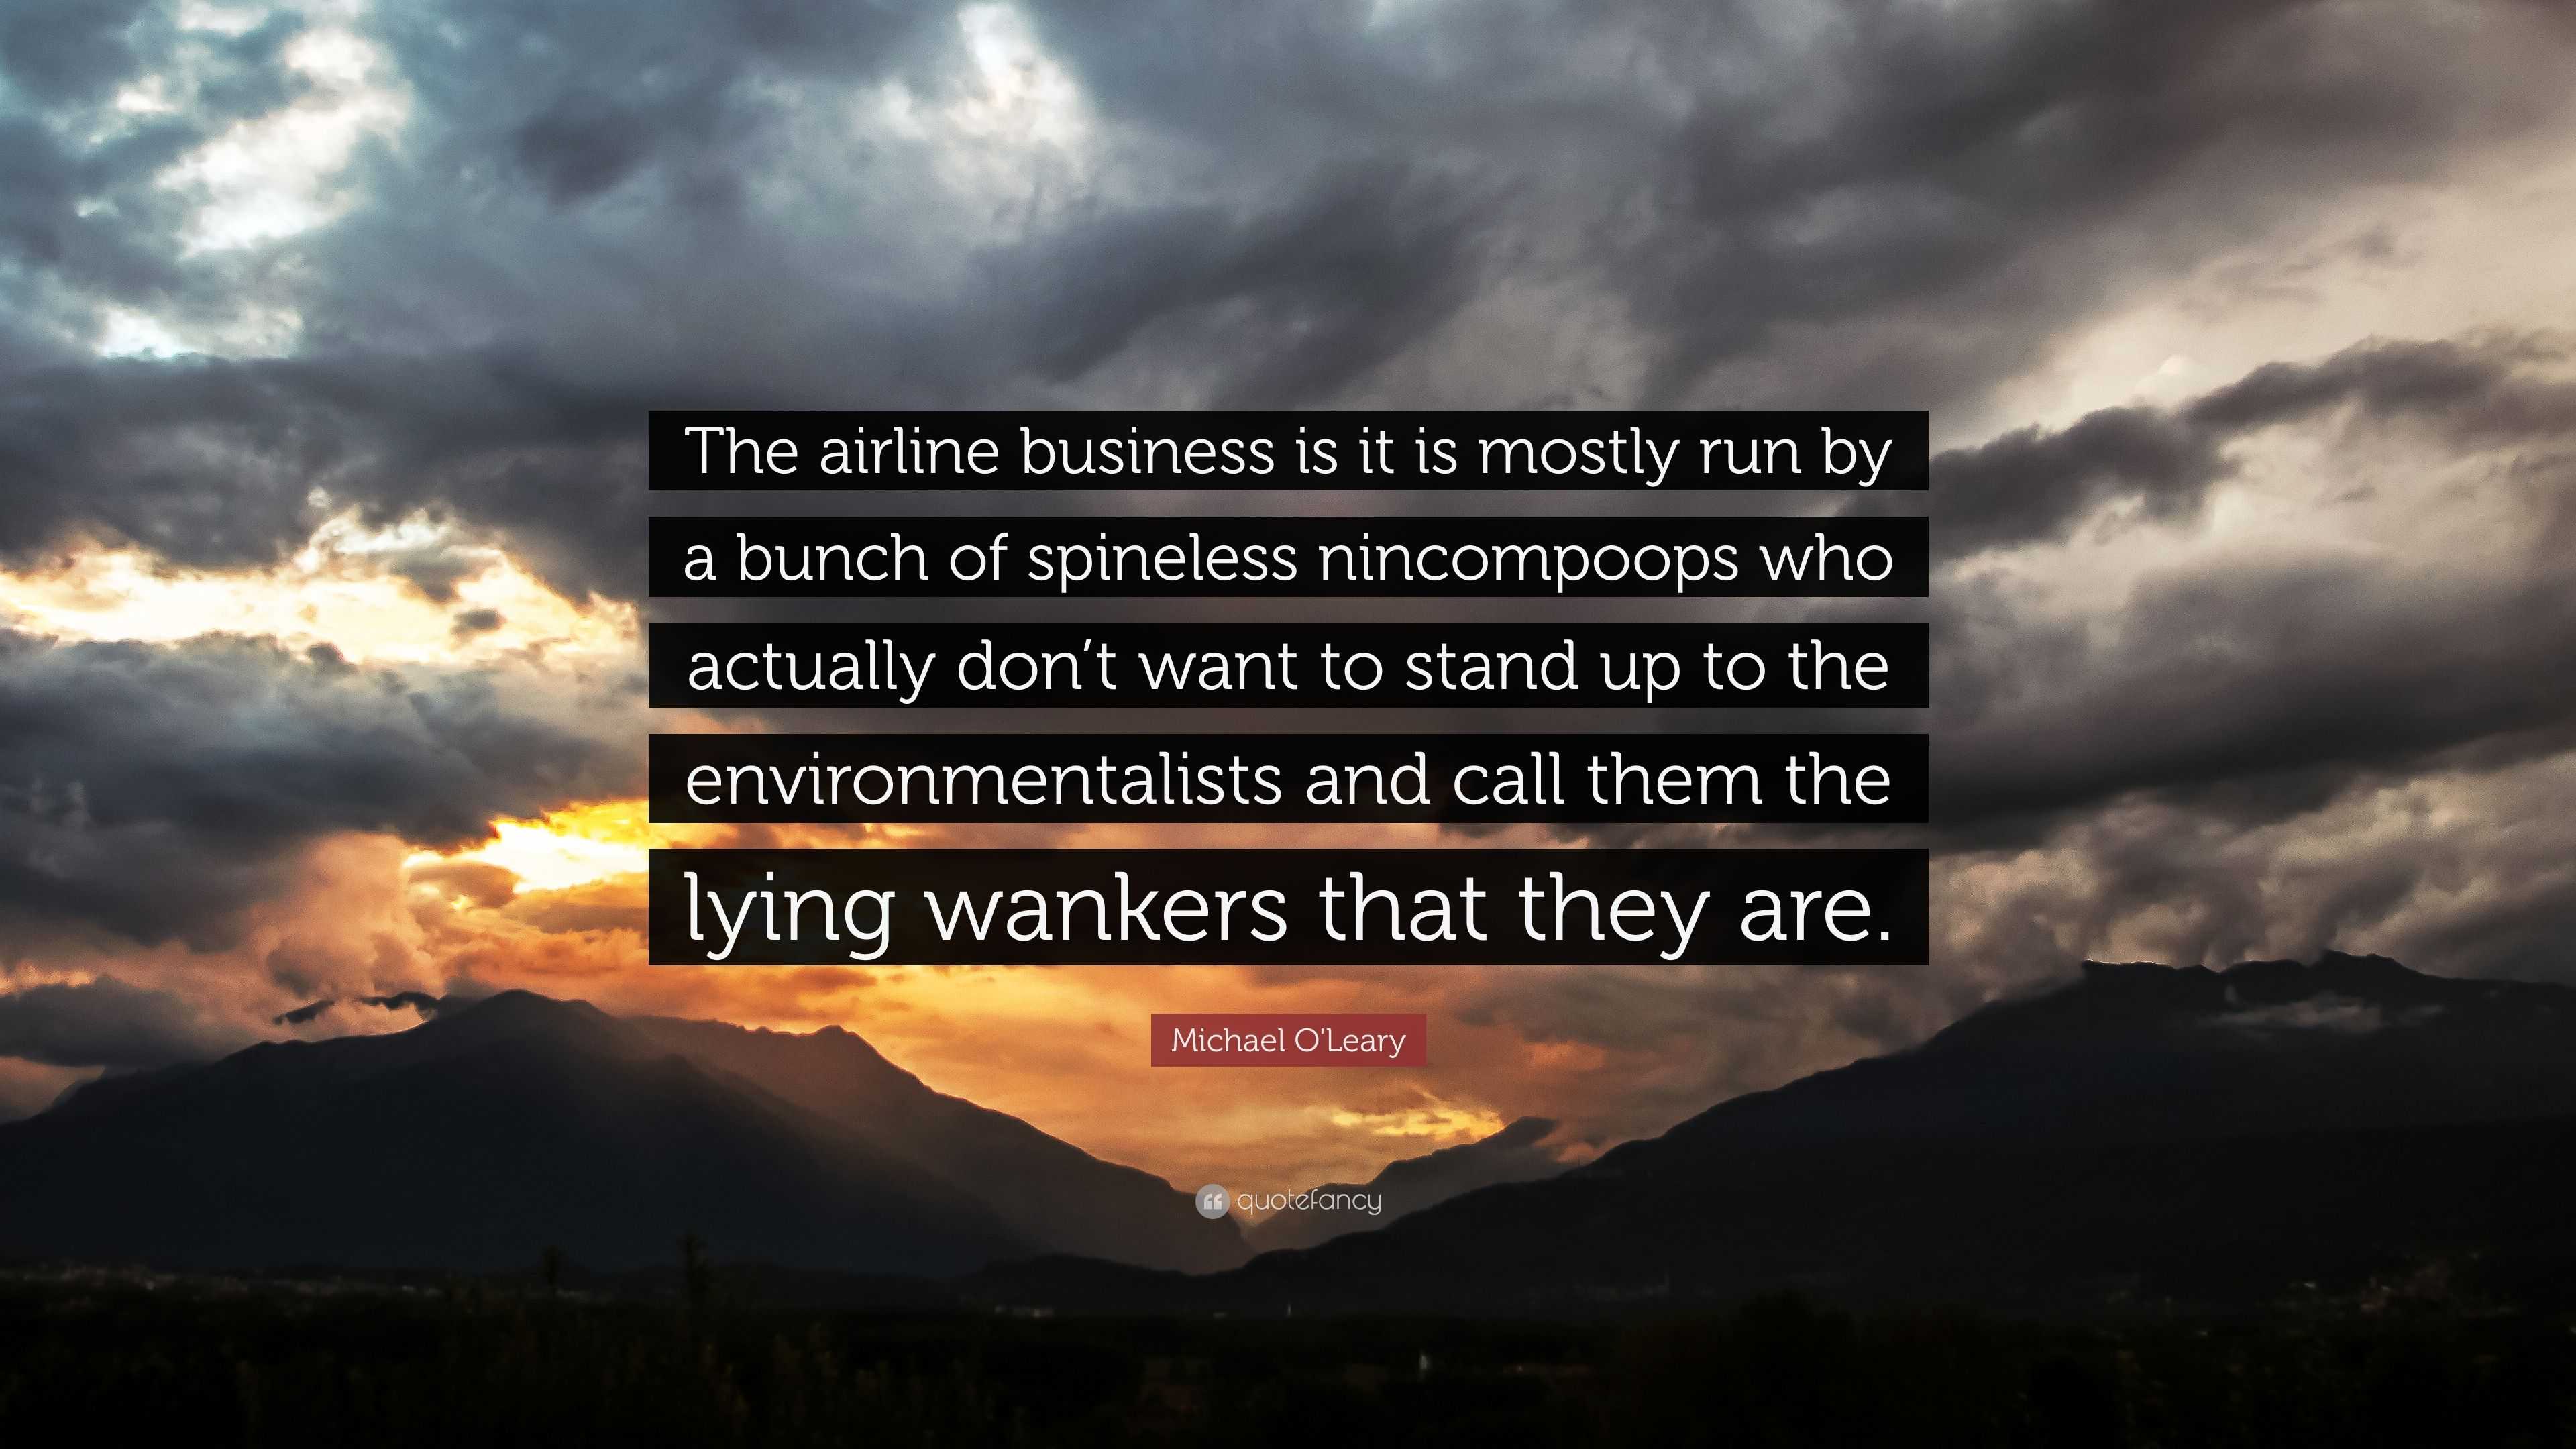 https://quotefancy.com/media/wallpaper/3840x2160/3023159-Michael-O-Leary-Quote-The-airline-business-is-it-is-mostly-run-by.jpg